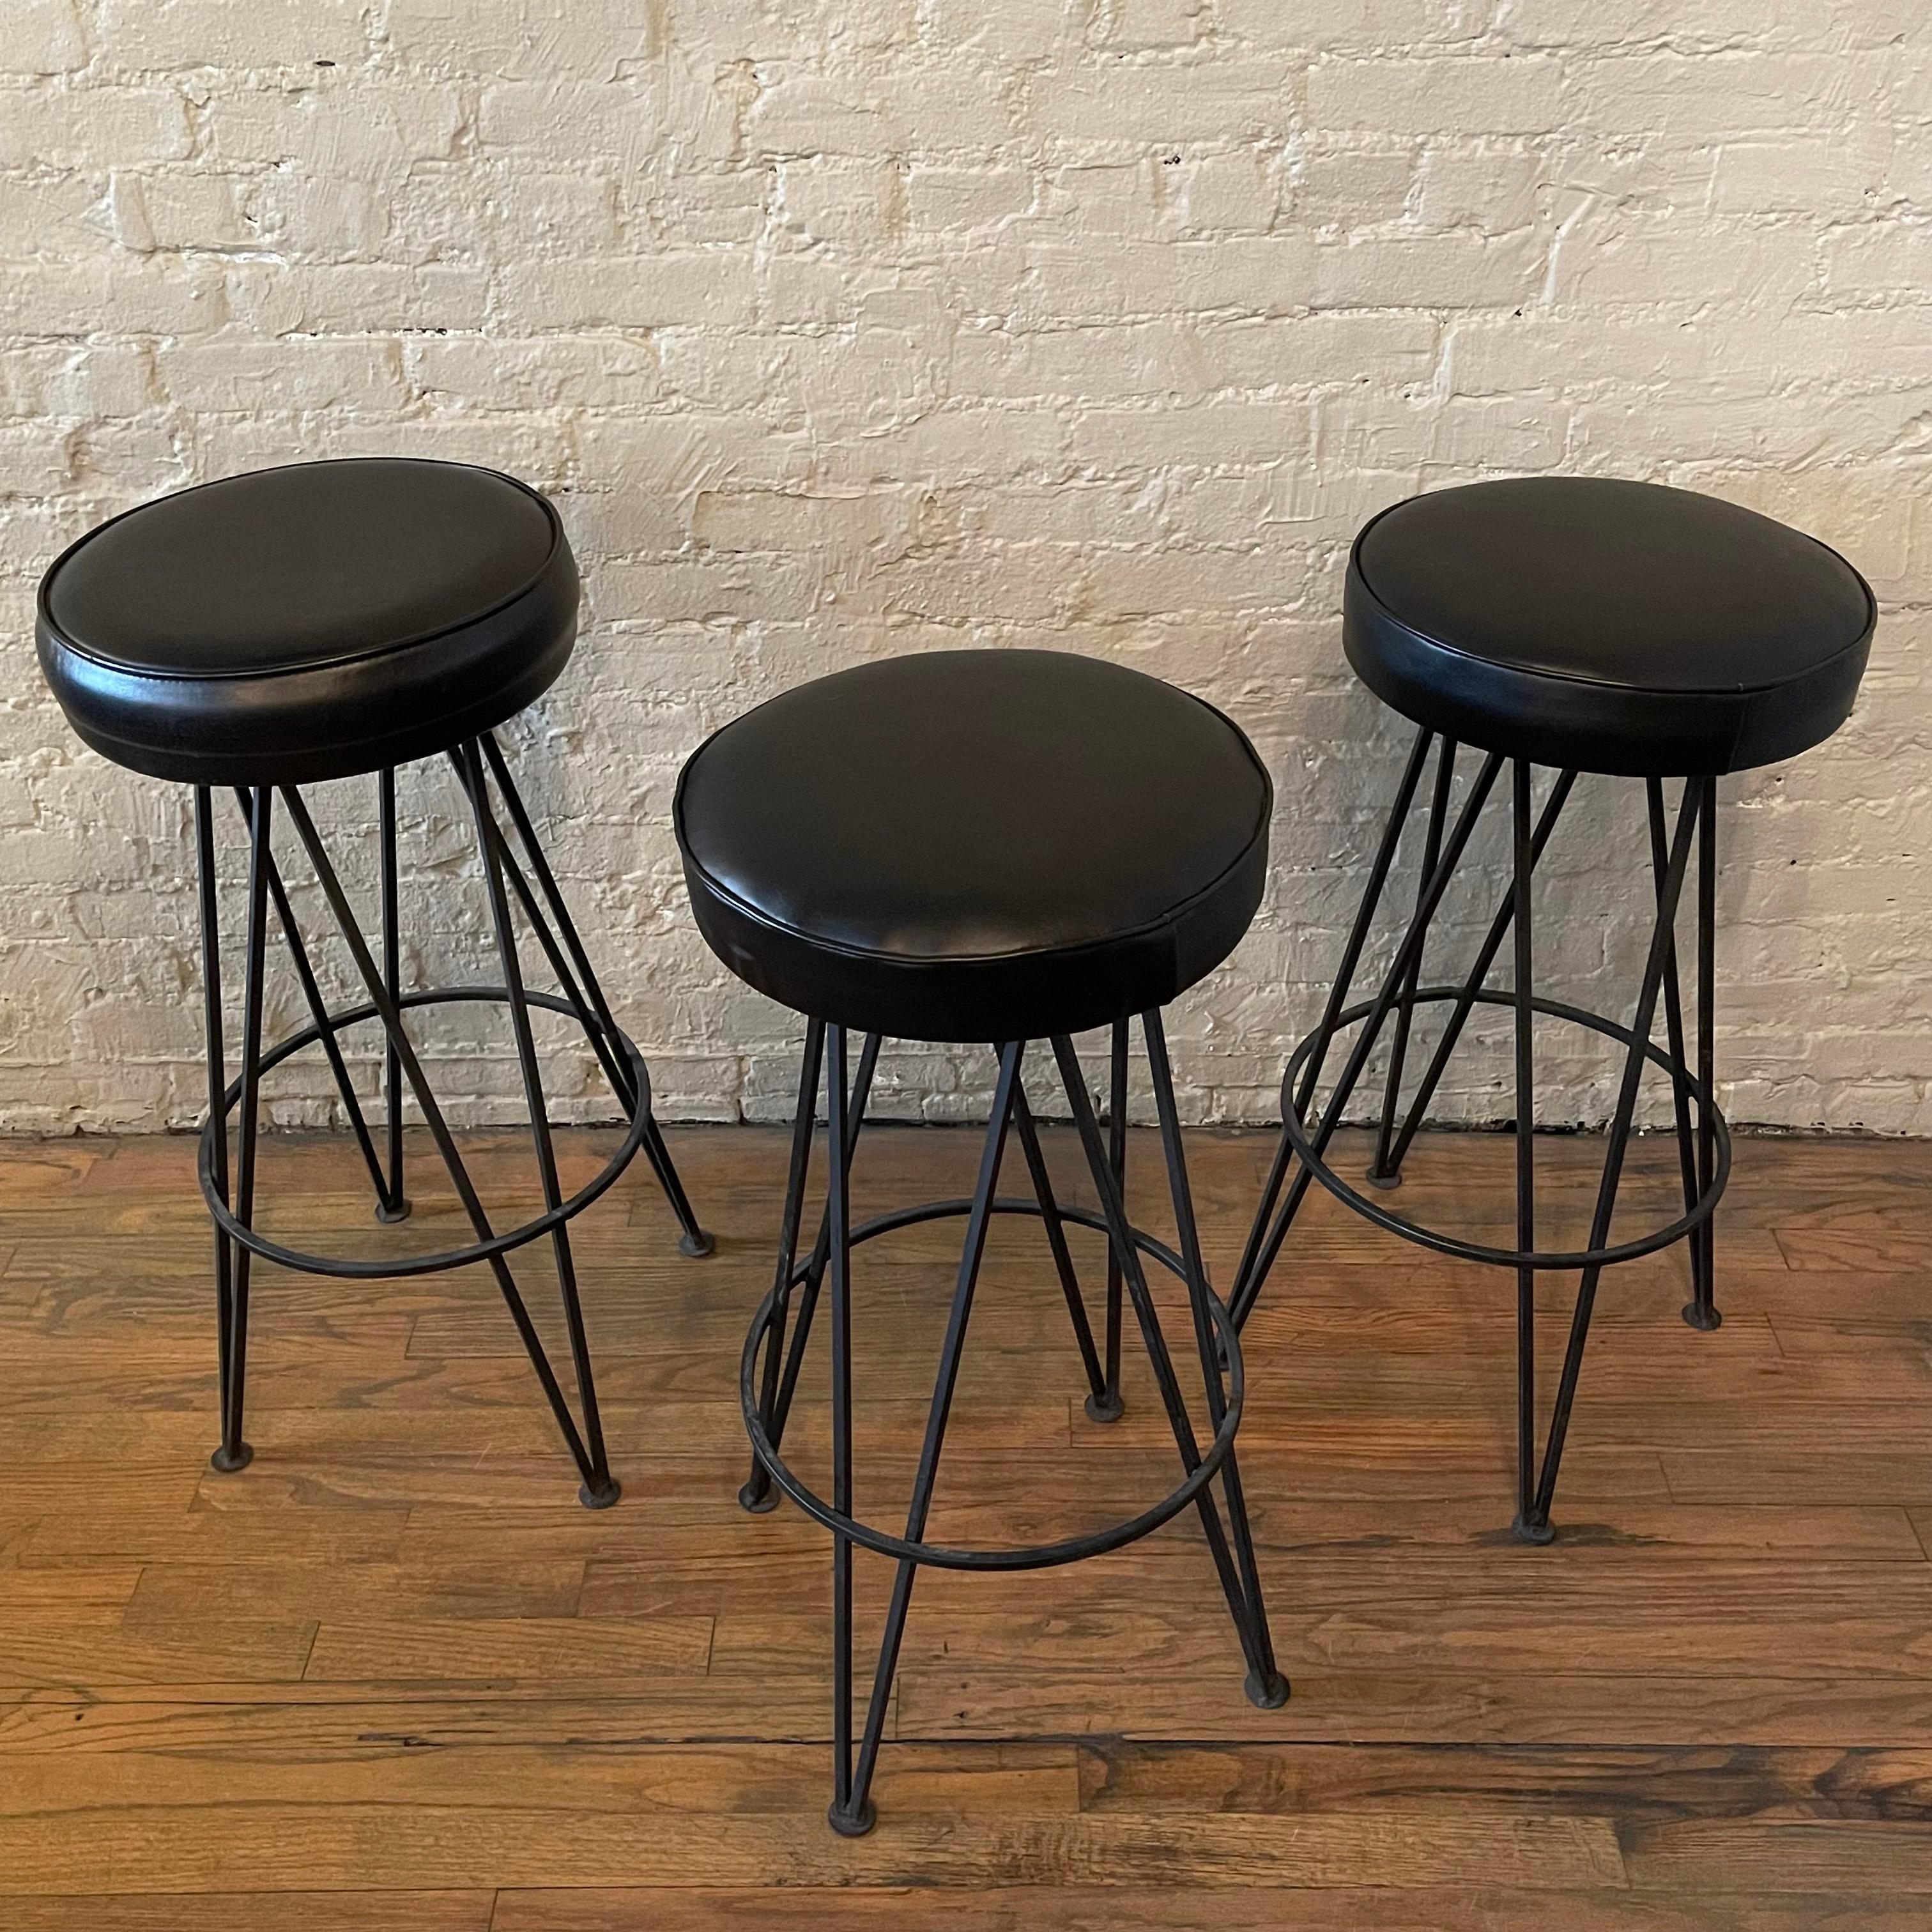 American Mid-Century Modern Wrought Iron Hairpin Bar Stools For Sale